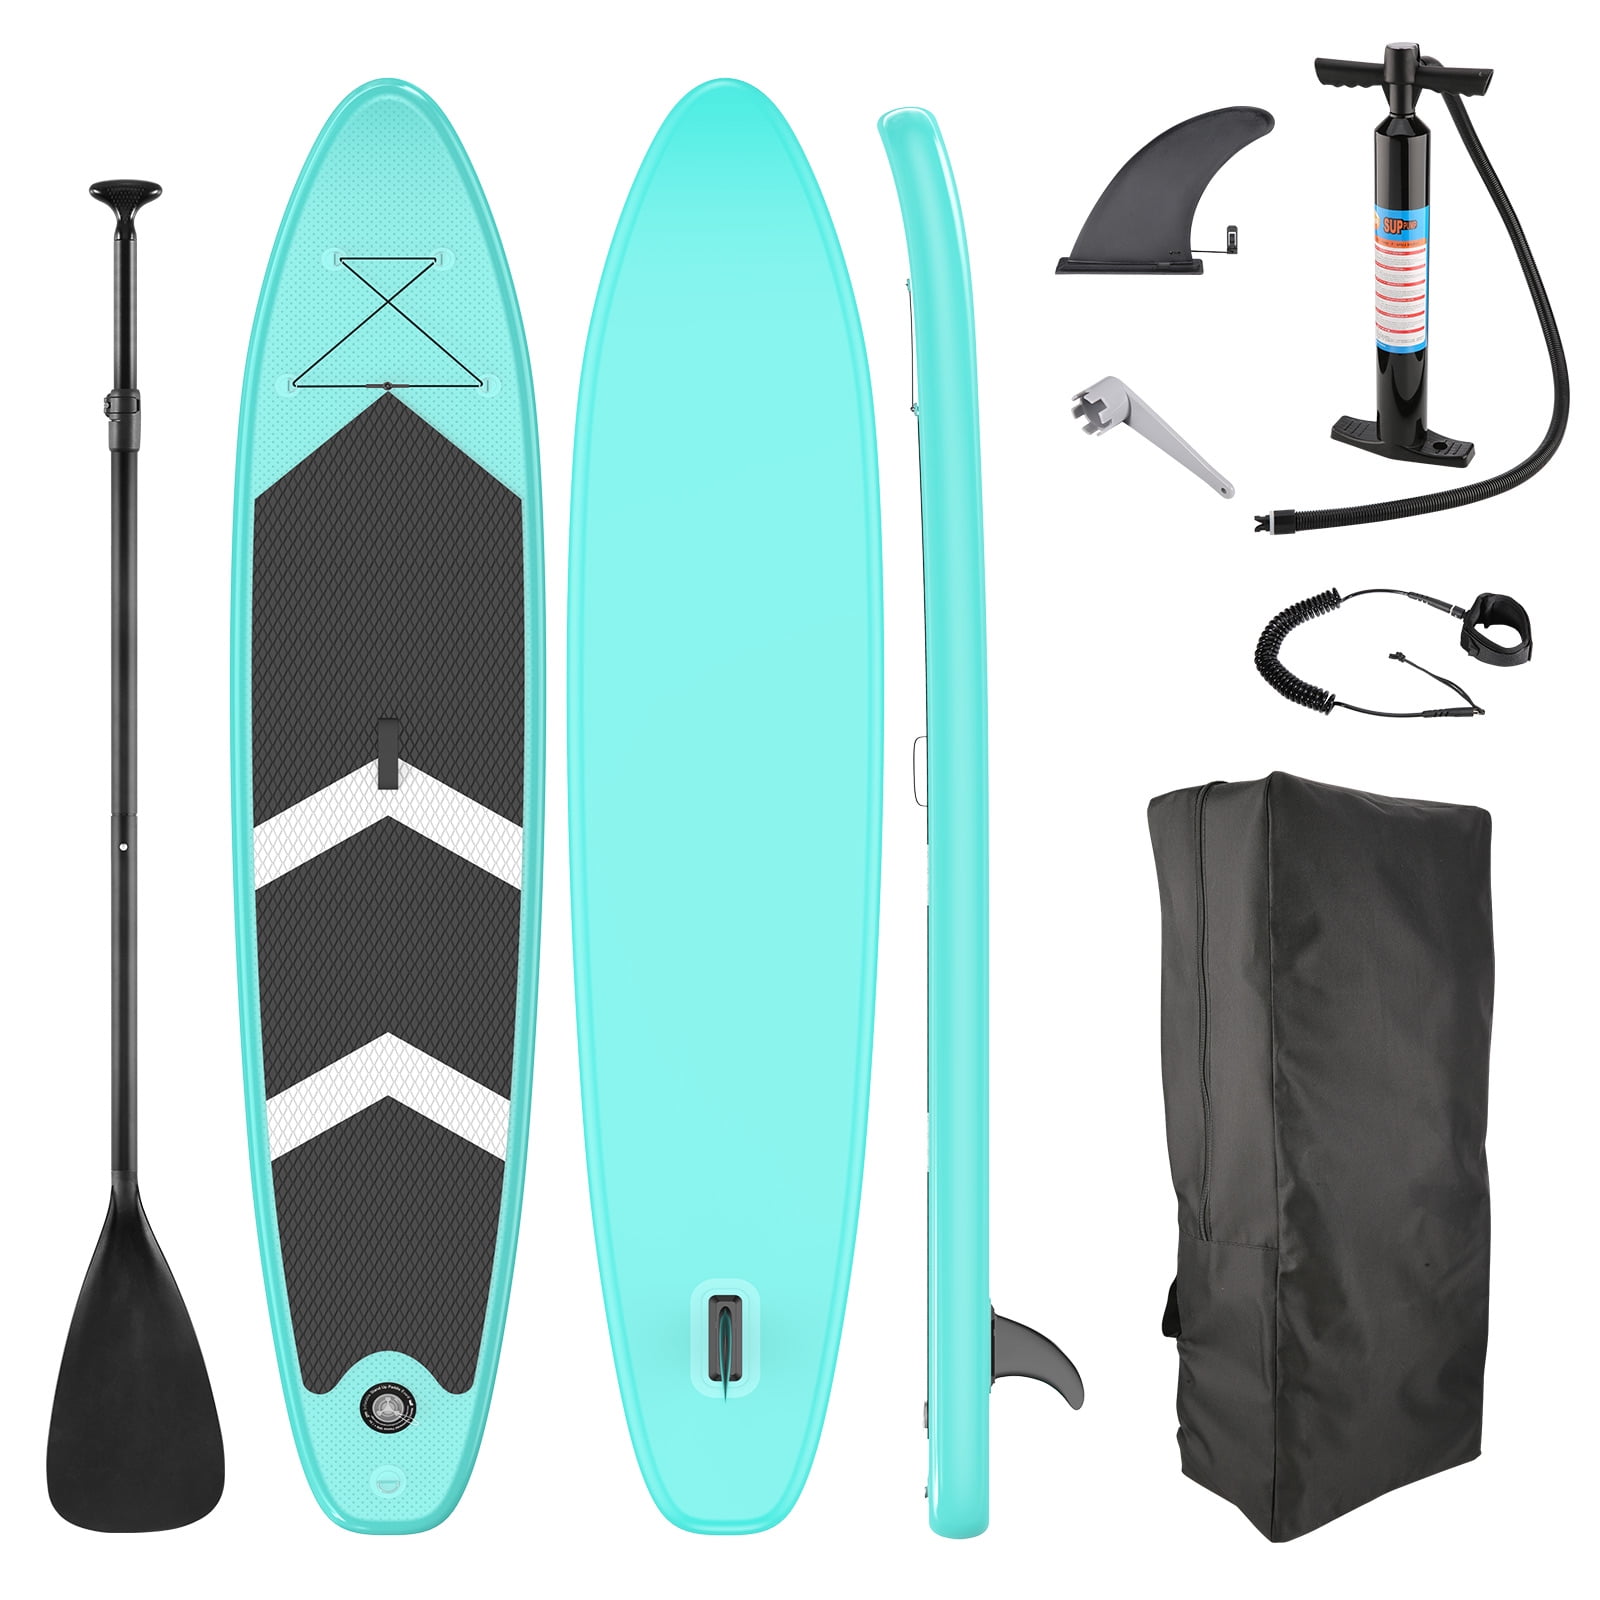 Goplus Inflatable Stand up Paddle Board Adjustable Aluminum Paddle Removable Fin Leash Carry Bag Hand Pump 6 Thick SUP with Premium Accessories 